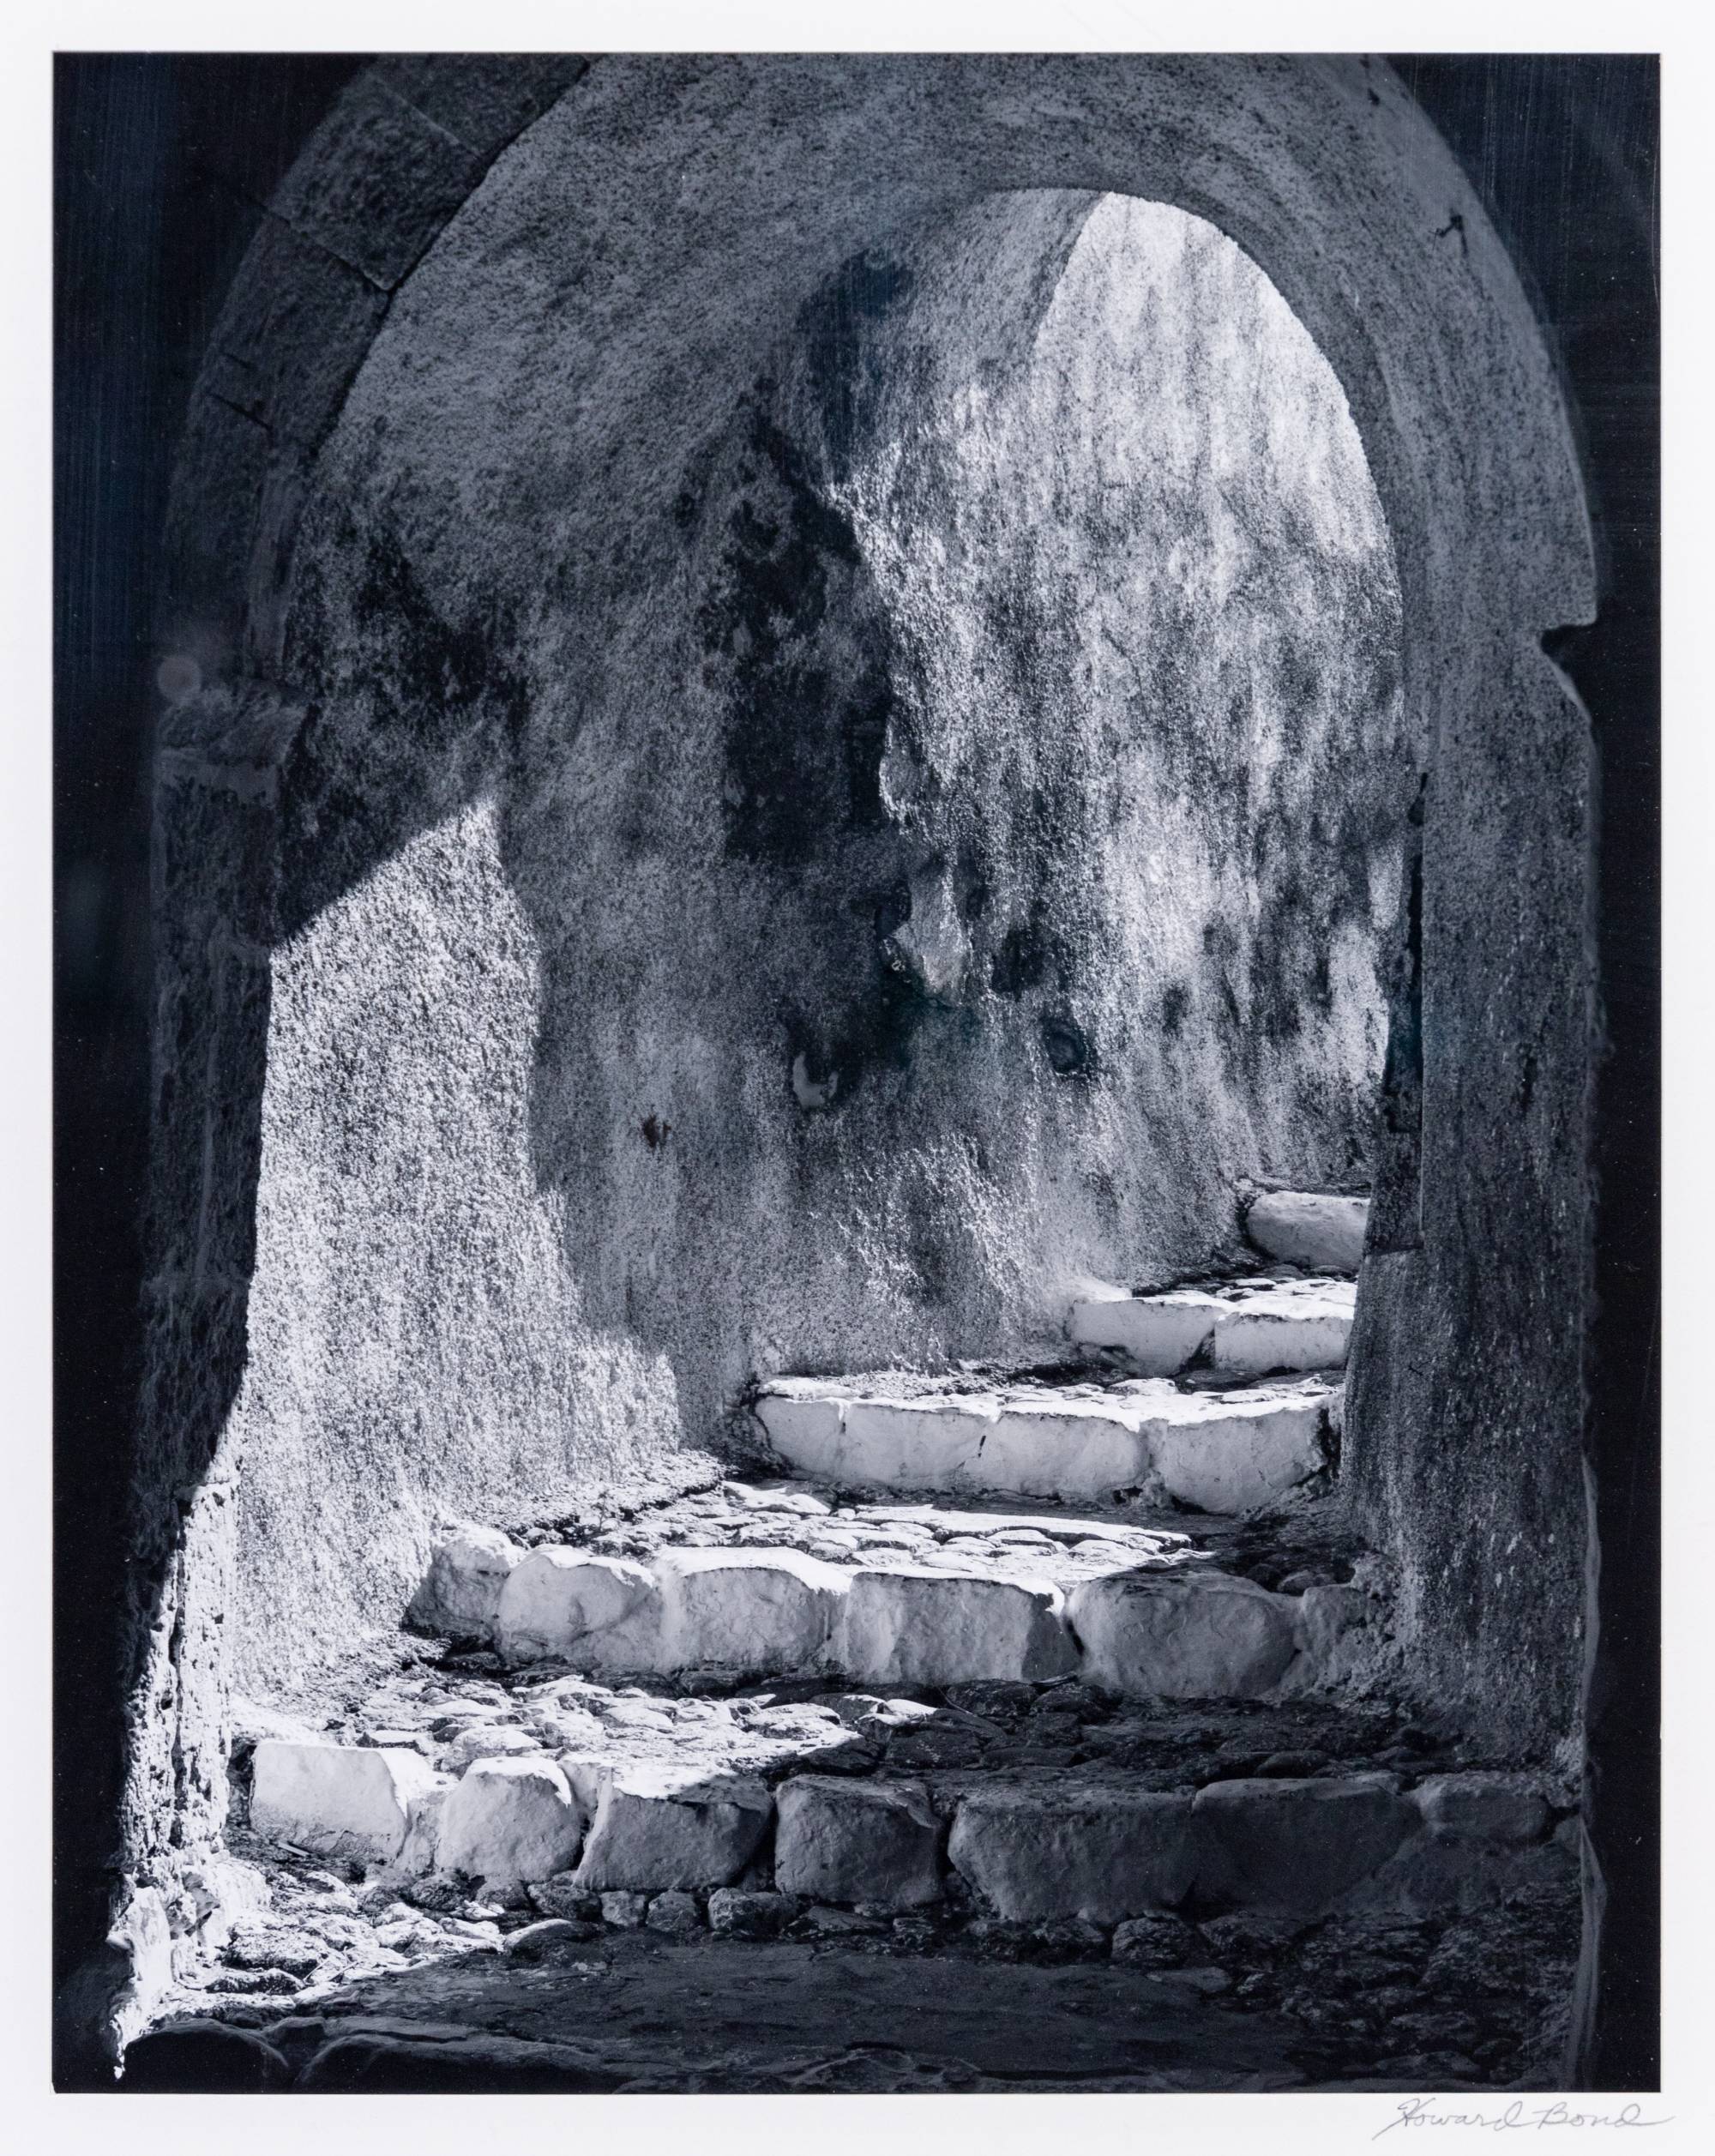 arched passage way containing stone steps